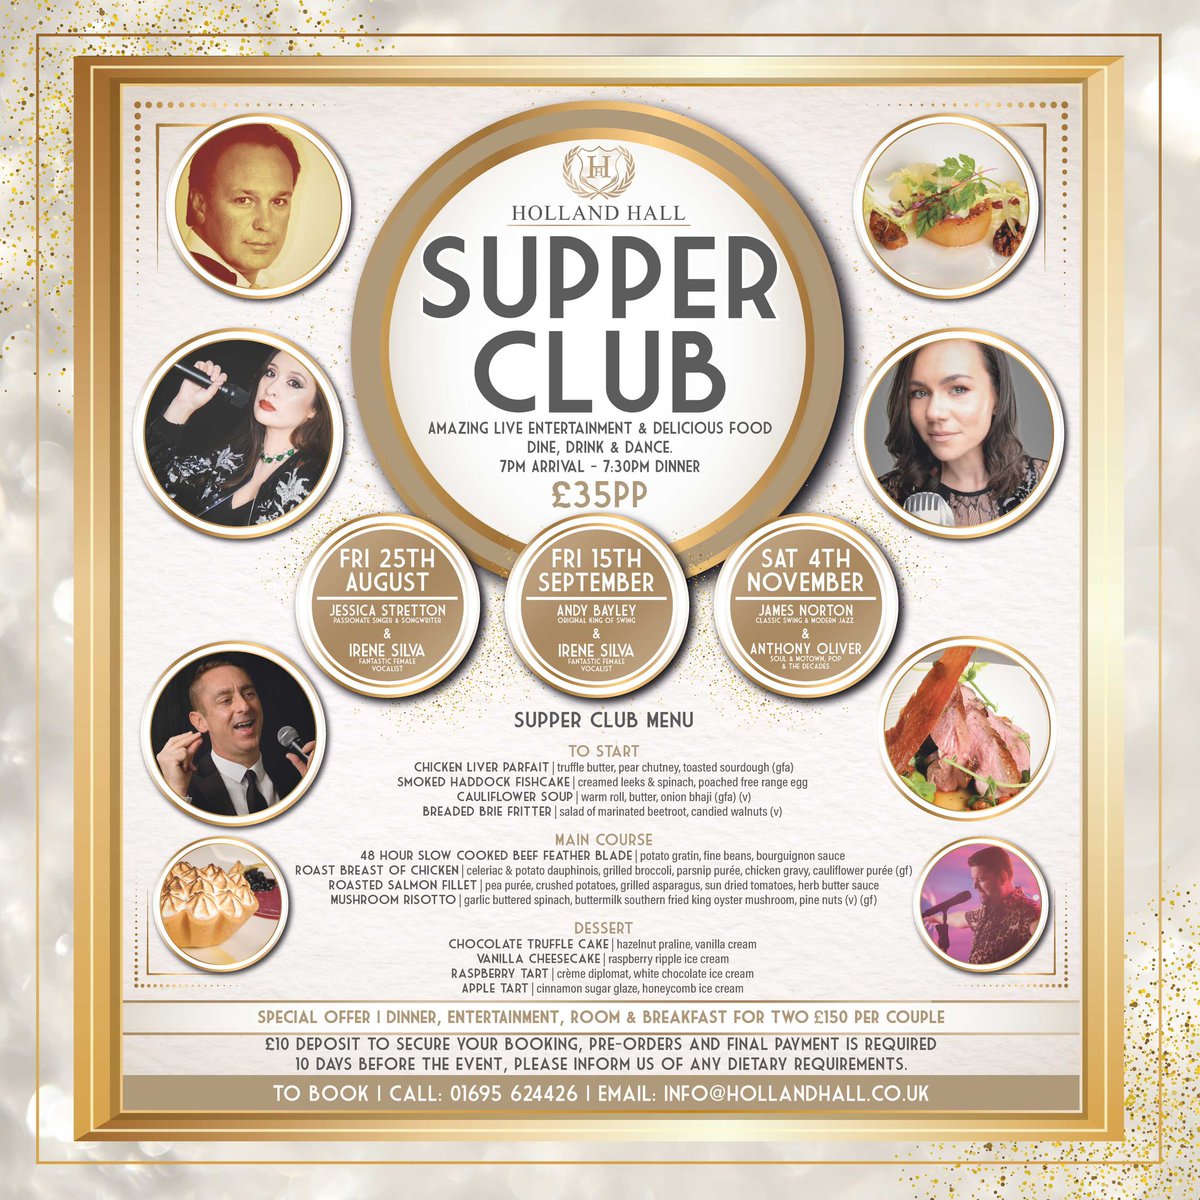 Supper Club at Holland Hall! Amazing Live Entertainment & Delicious Food. Dine, Drink & Dance - £35pp. 🌟🪩🎶🥂💃🏻 

📖 To Book | Call: 01695 624426 | Email: info@hollandhall.co.uk

#supperclub #livemusic #perfectplacetostay #greatfood
#entertainment #hollandhall #hiddengem